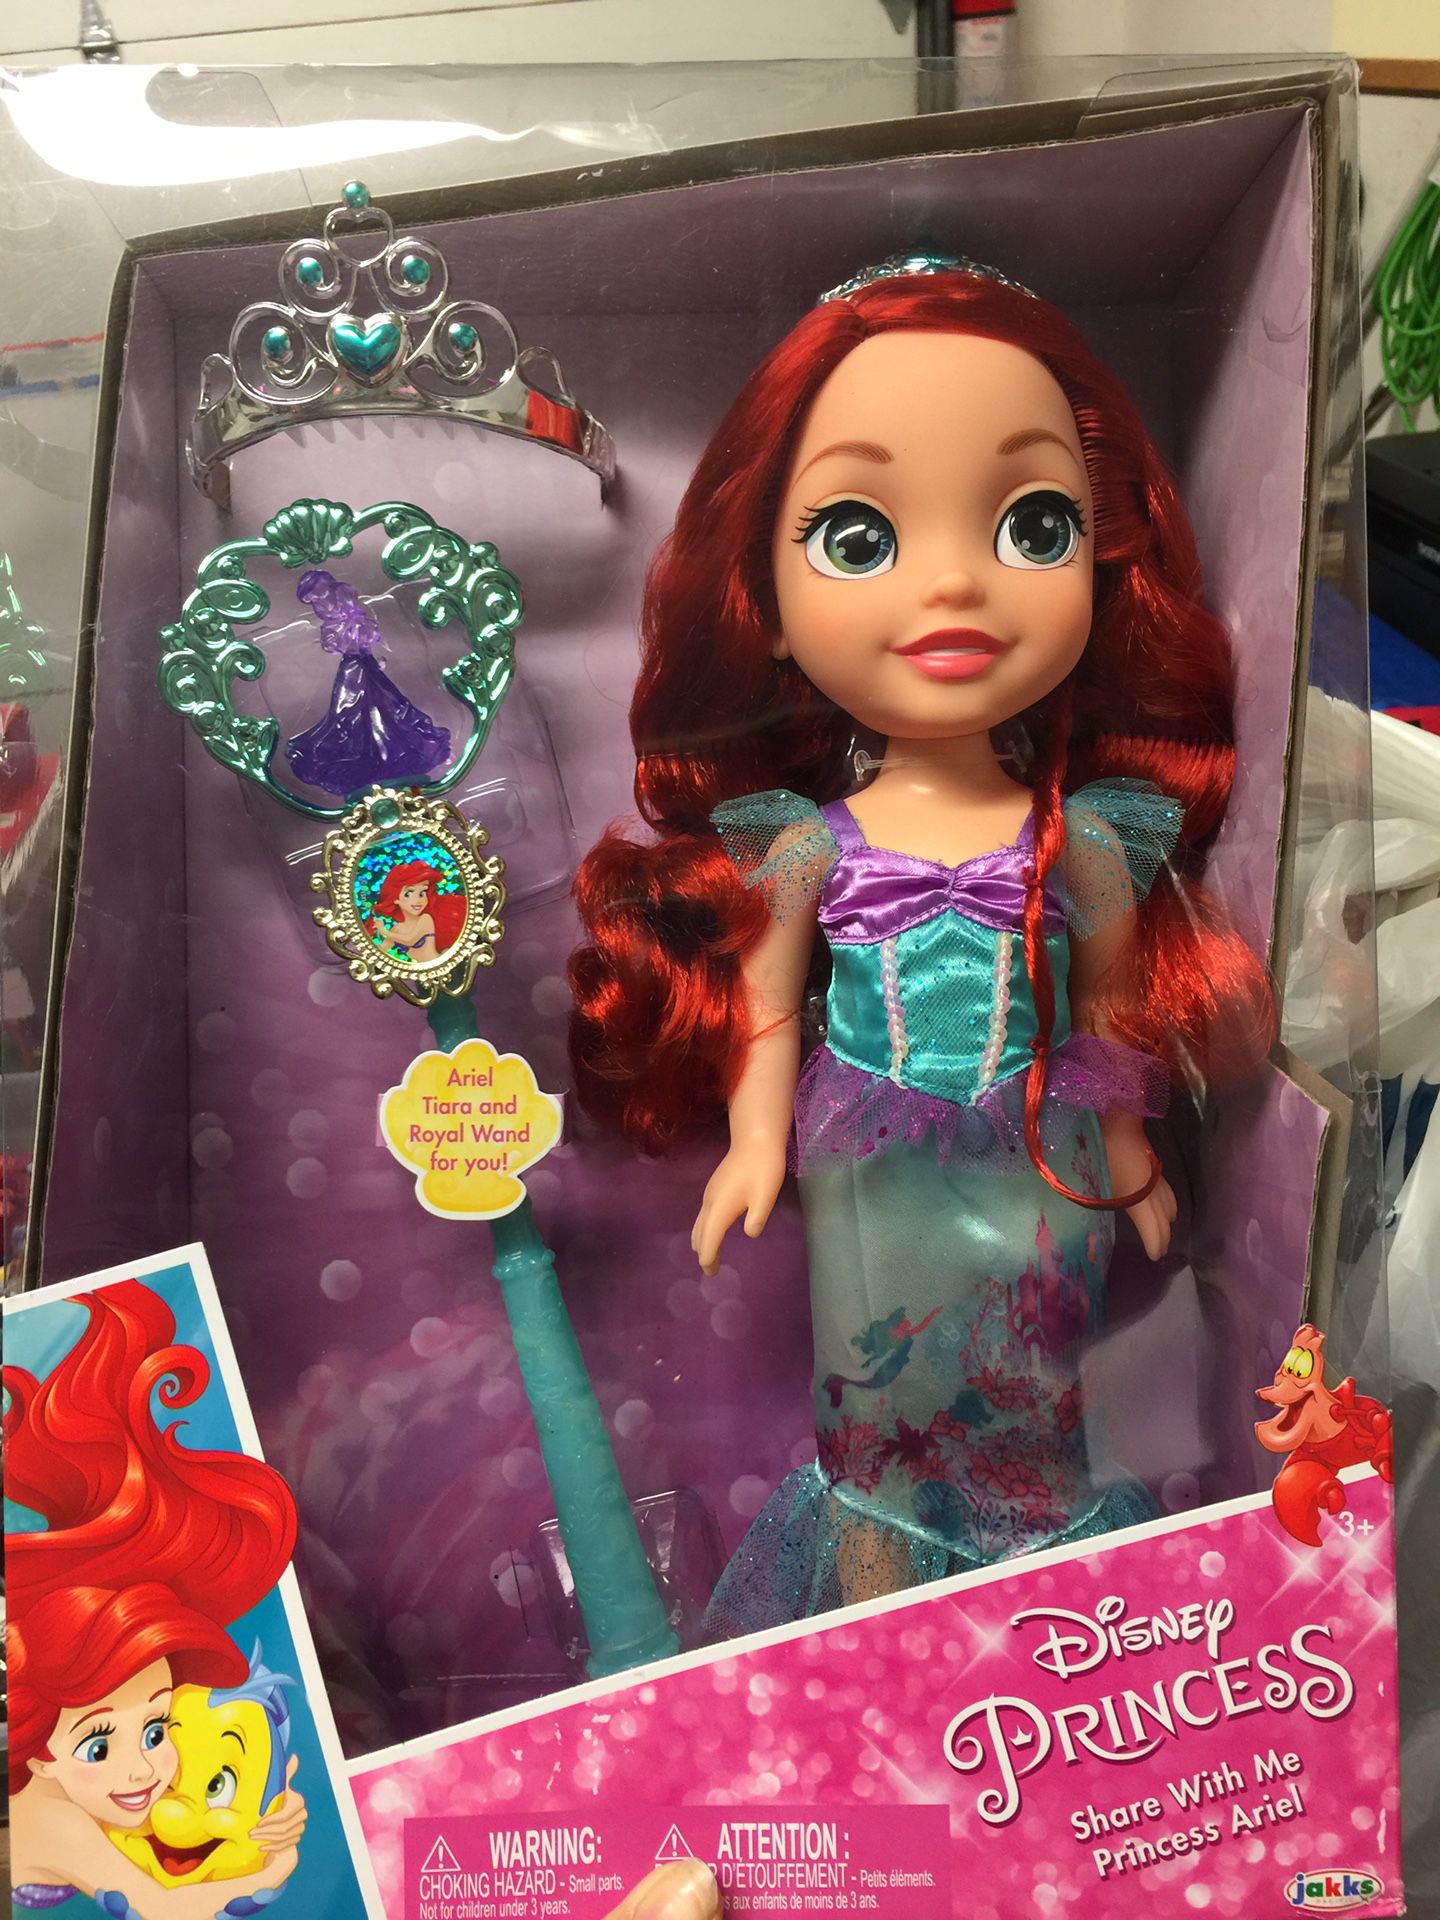 Little mermaid Share with me doll!